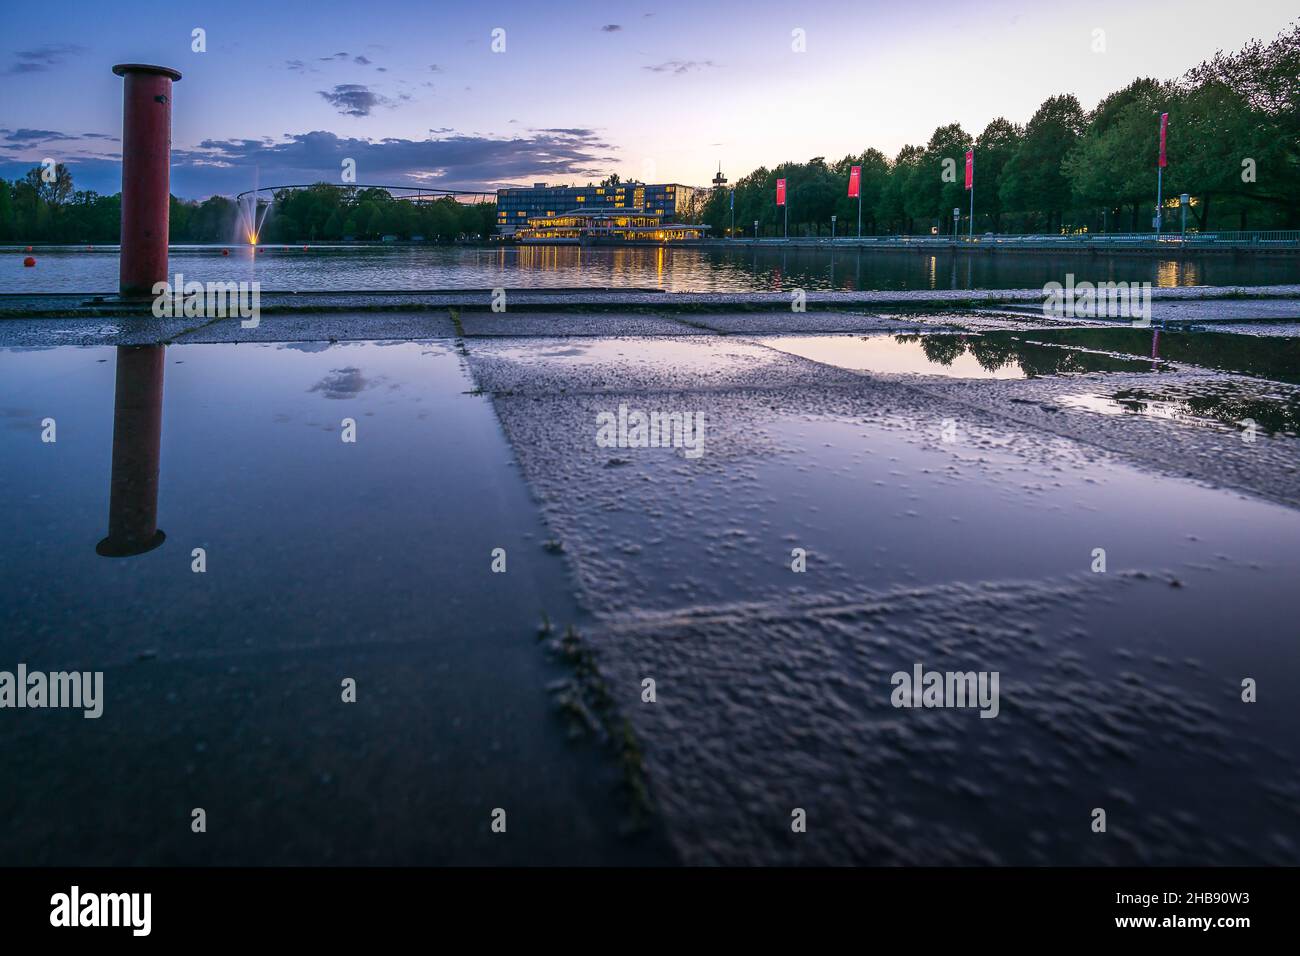 Beautiful view of a puddle at the edge of Masch lake in Hanover, Germany Stock Photo